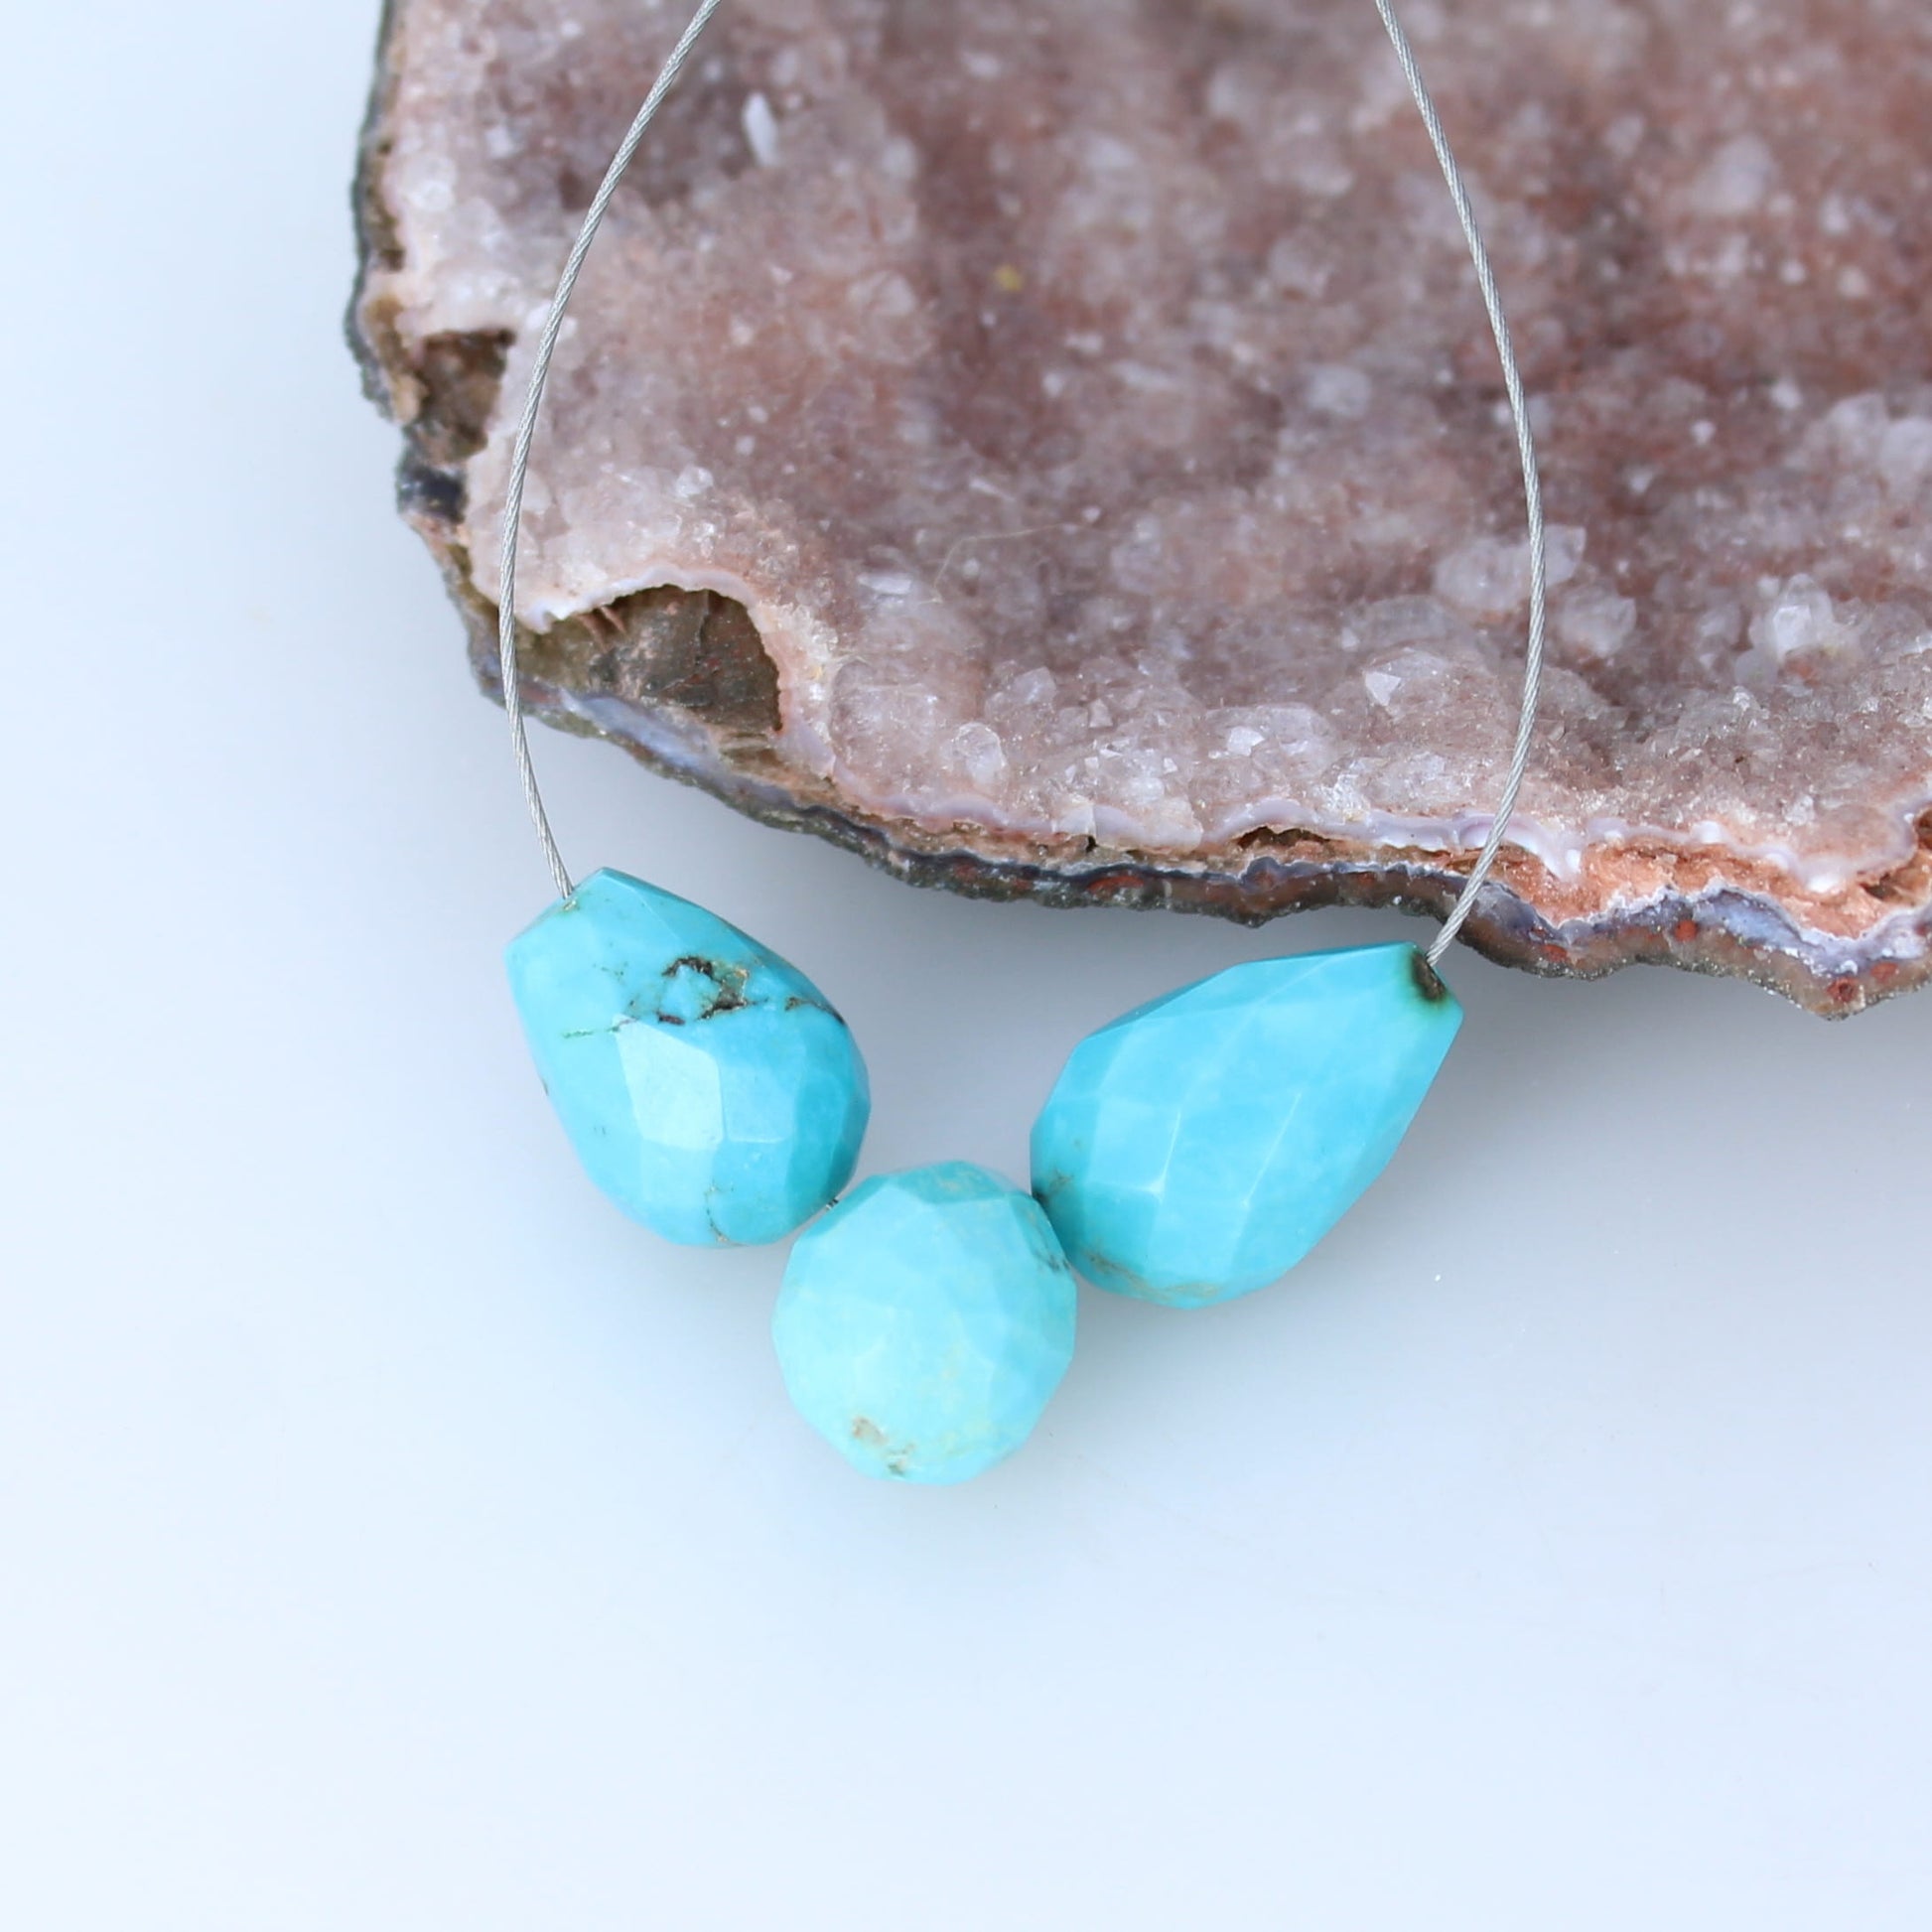 Turquoise Faceted Teardrops Components 3 Pcs -NewWorldGems